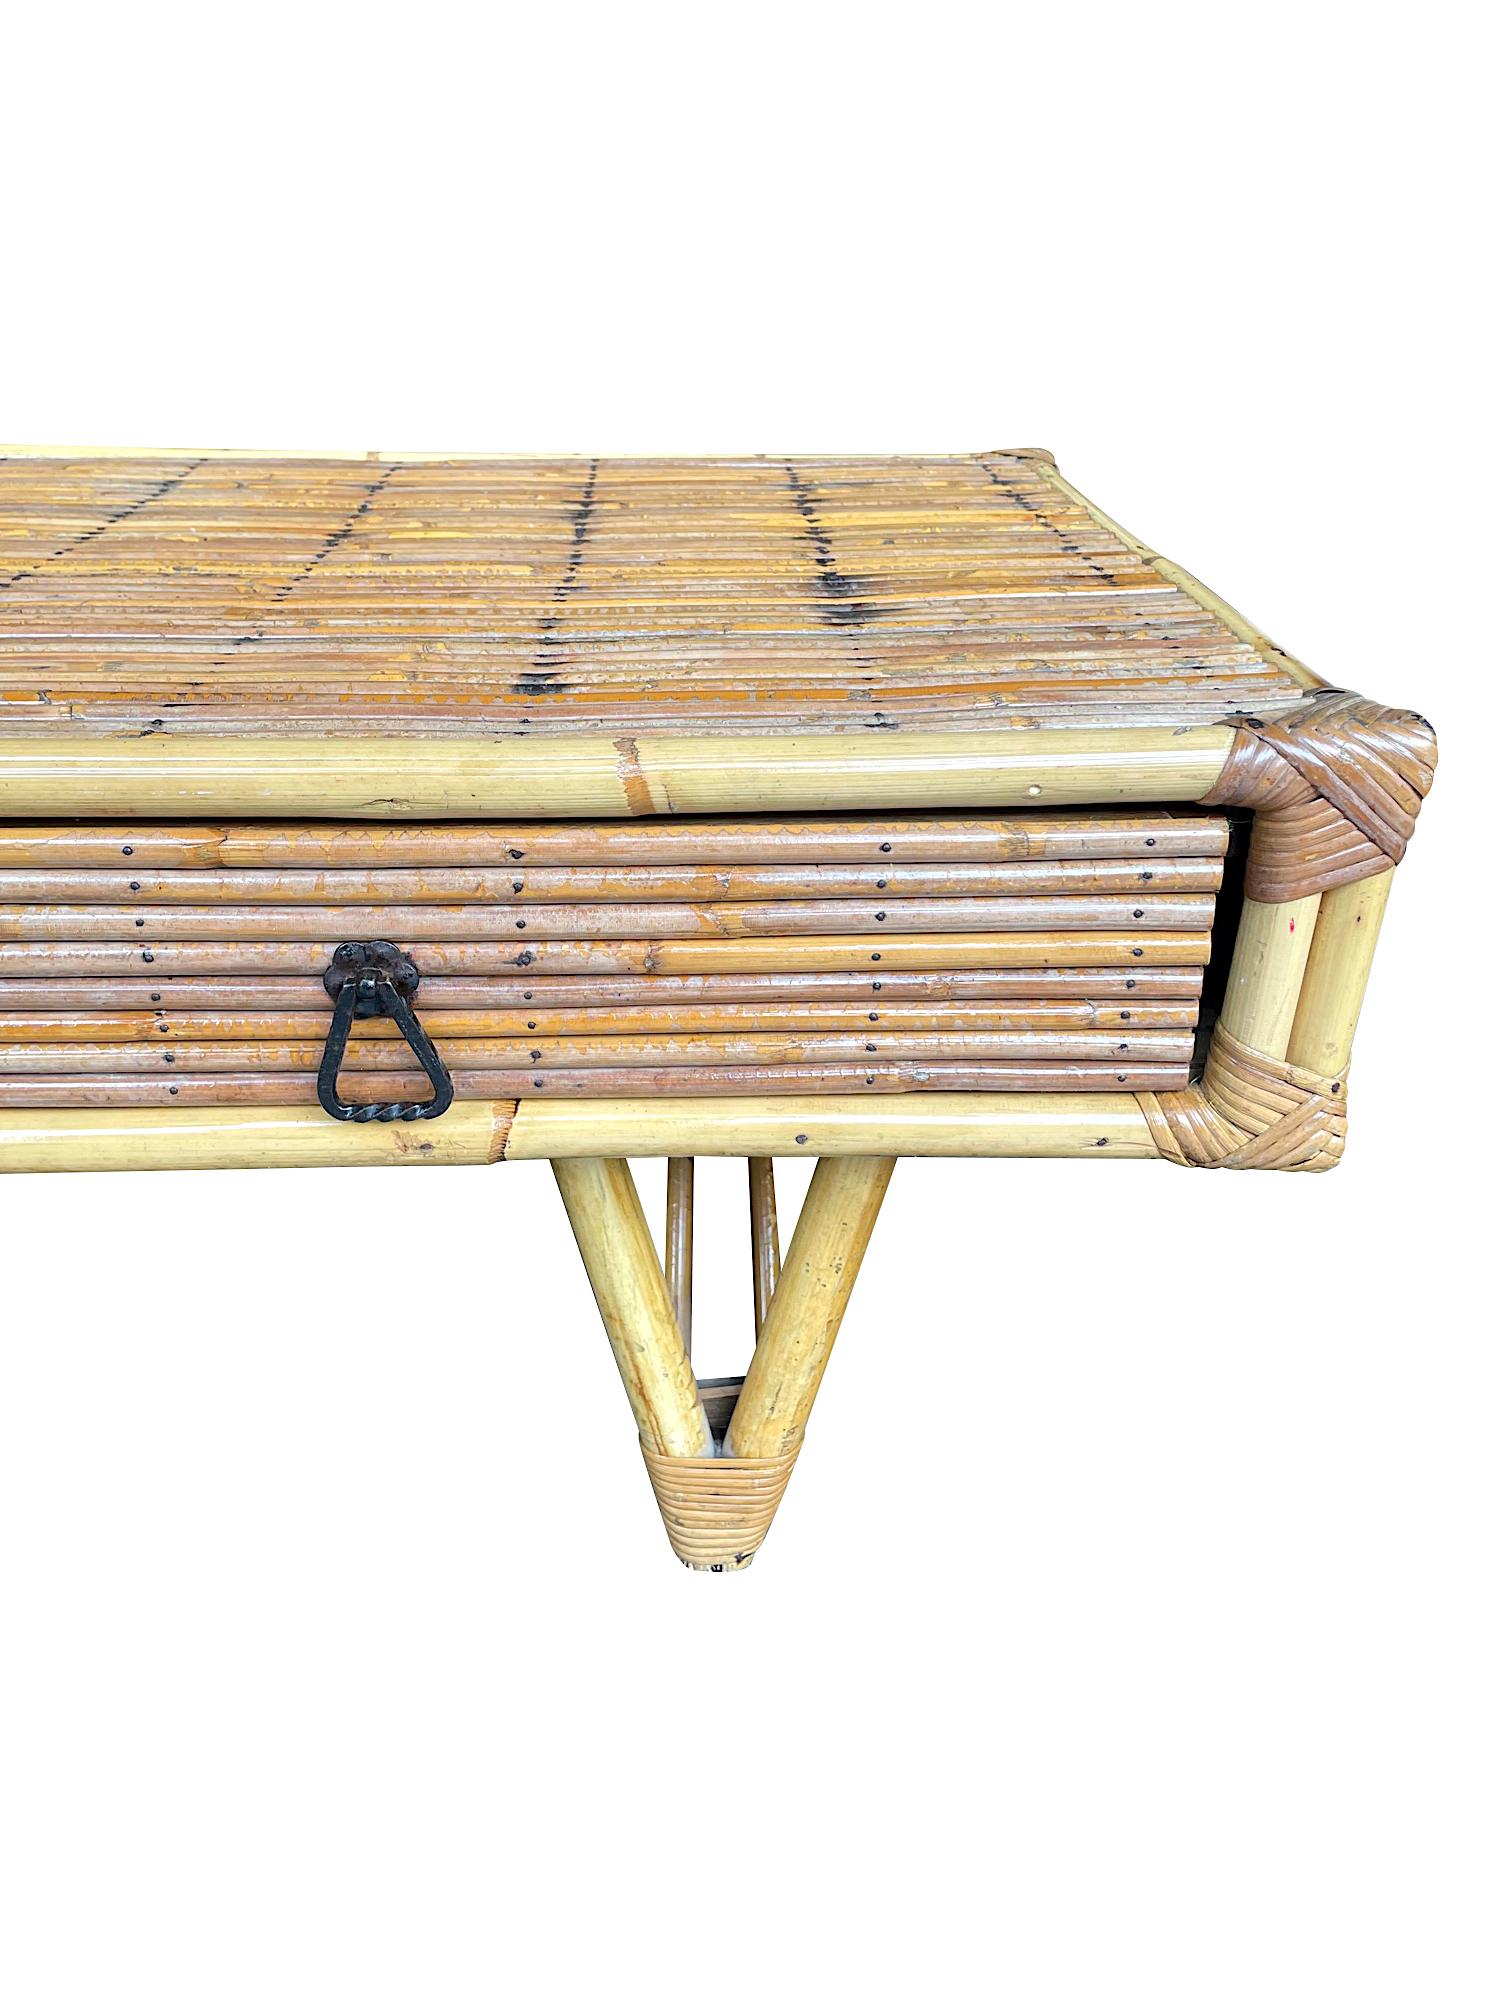 French 1960s Bamboo and Rattan Coffee Table with Two Drawers For Sale 4